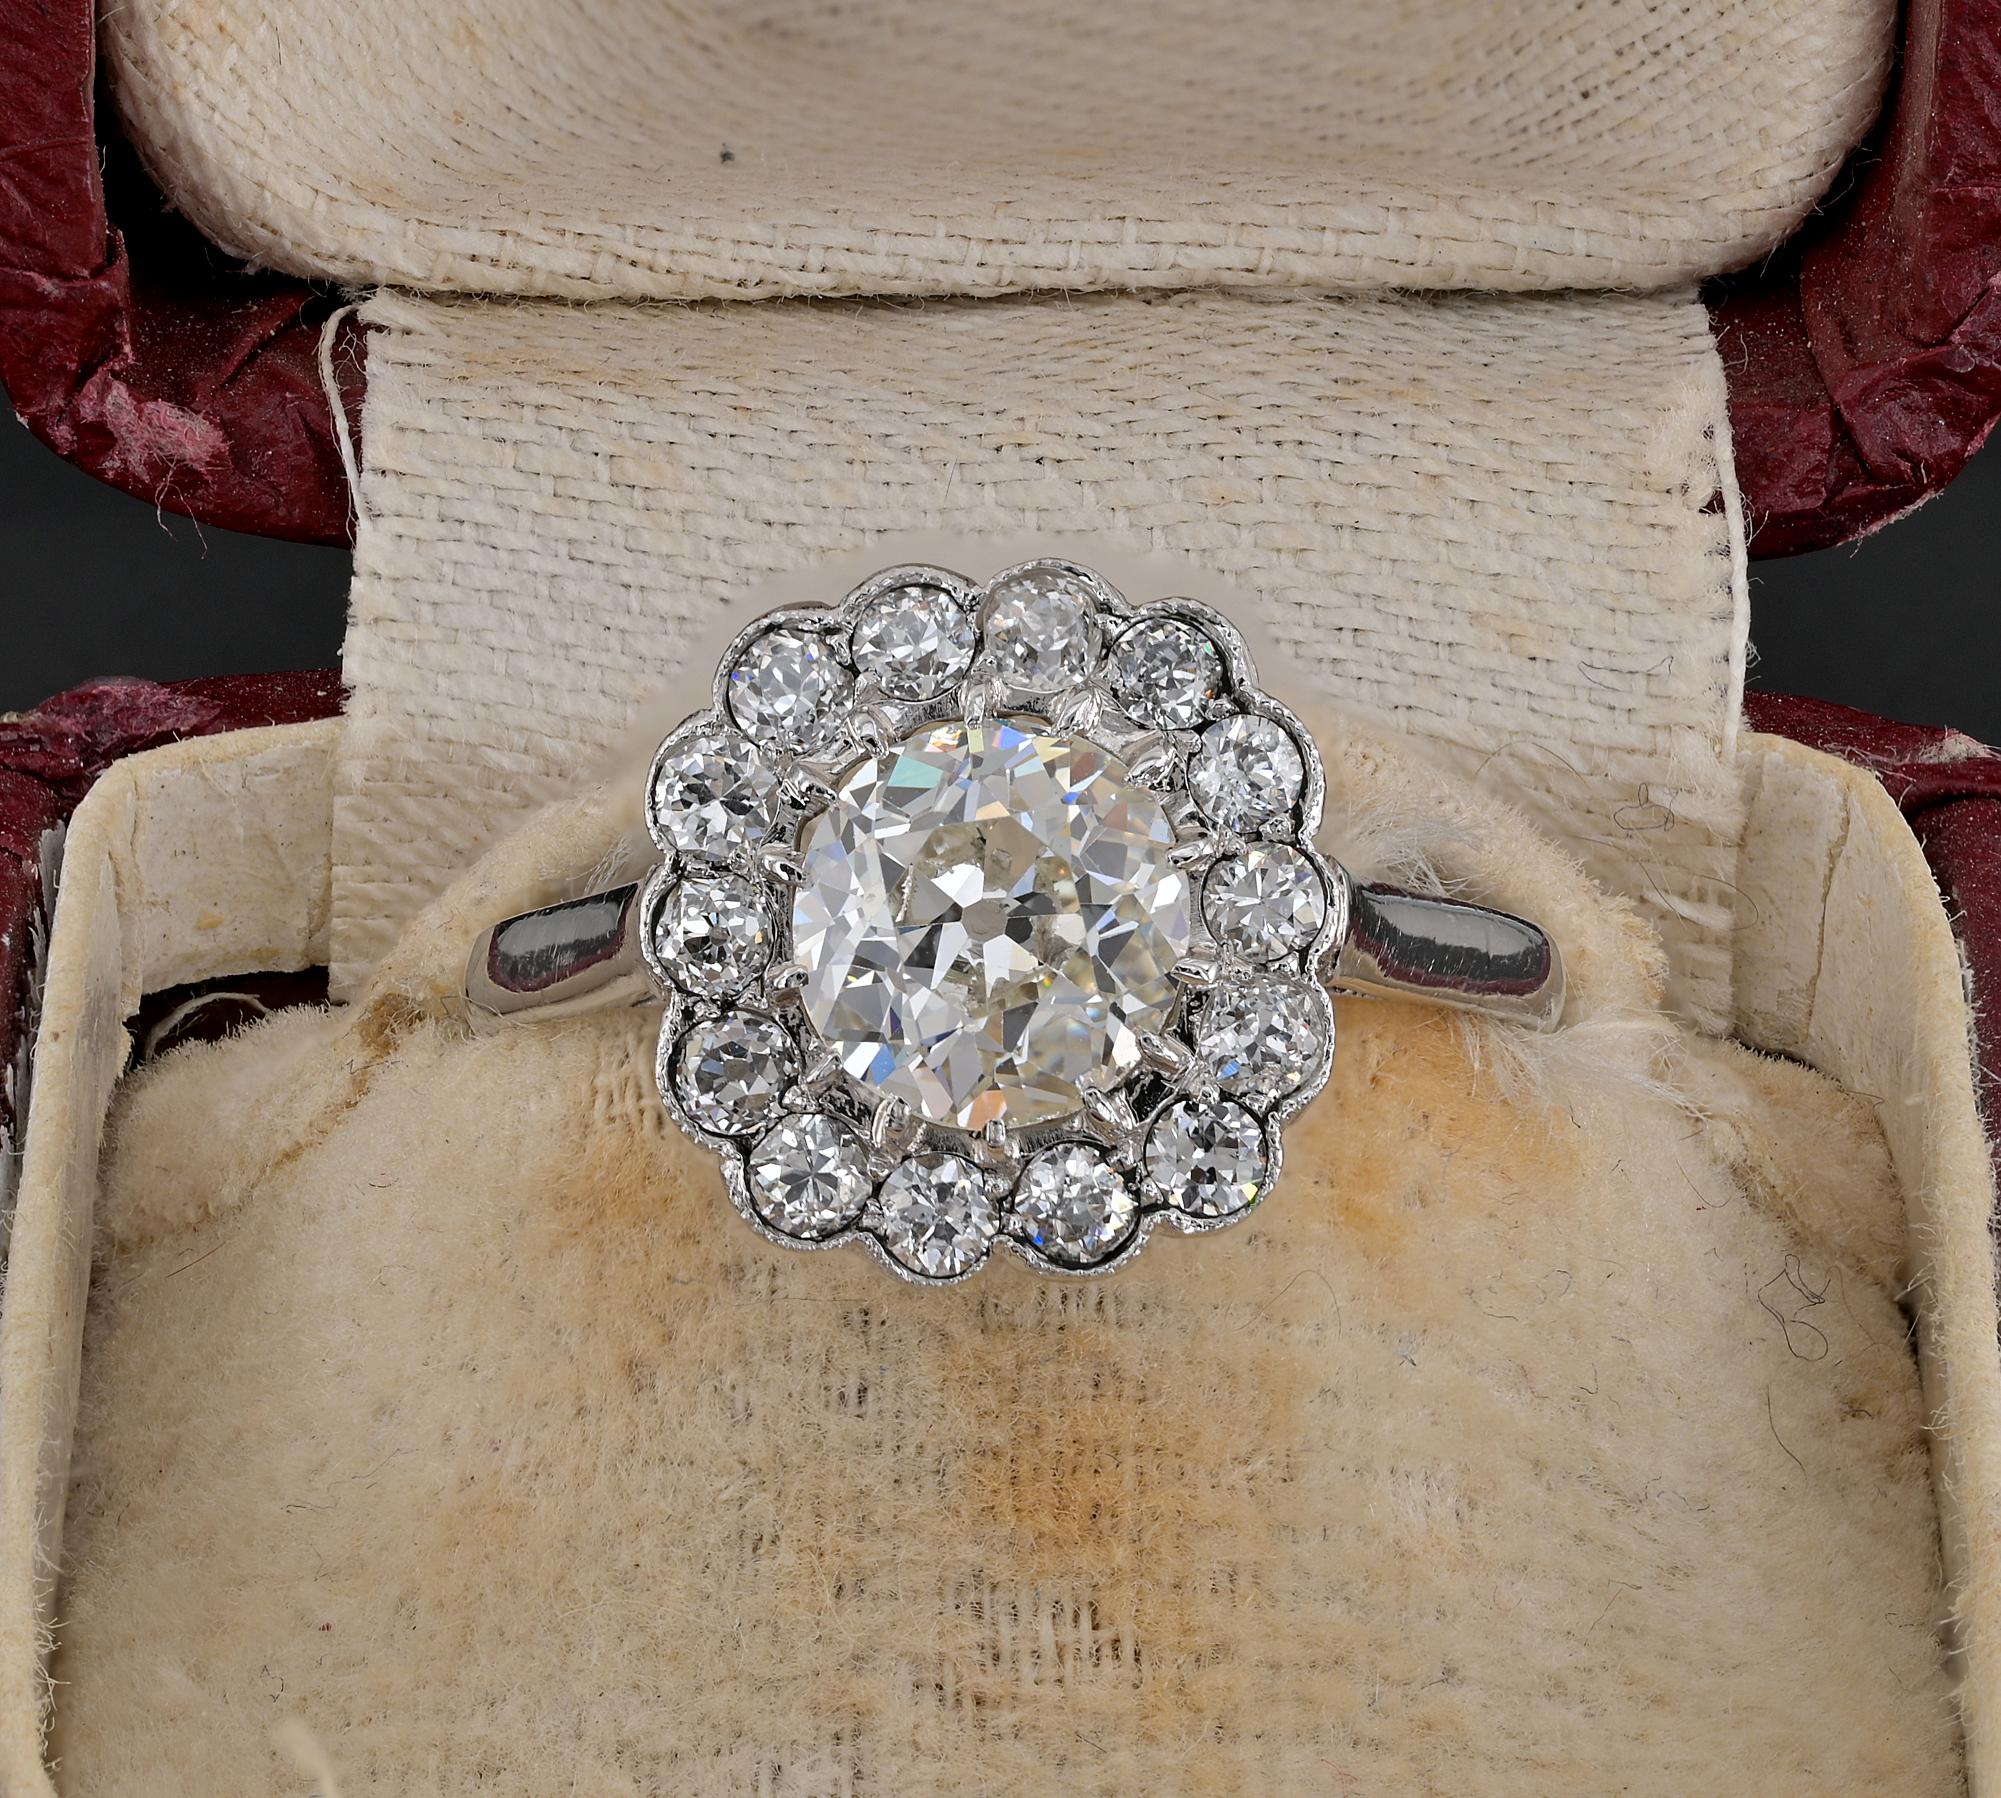 This beautiful late Art Deco is 1935 ca
Hand crafted of solid Platinum, marked
an old Halo ring with timeless presence and appeal
Principle Diamond is a bright white old European cut of 1.15 Ct which spreads as much as 1.25 Ct if measured with a